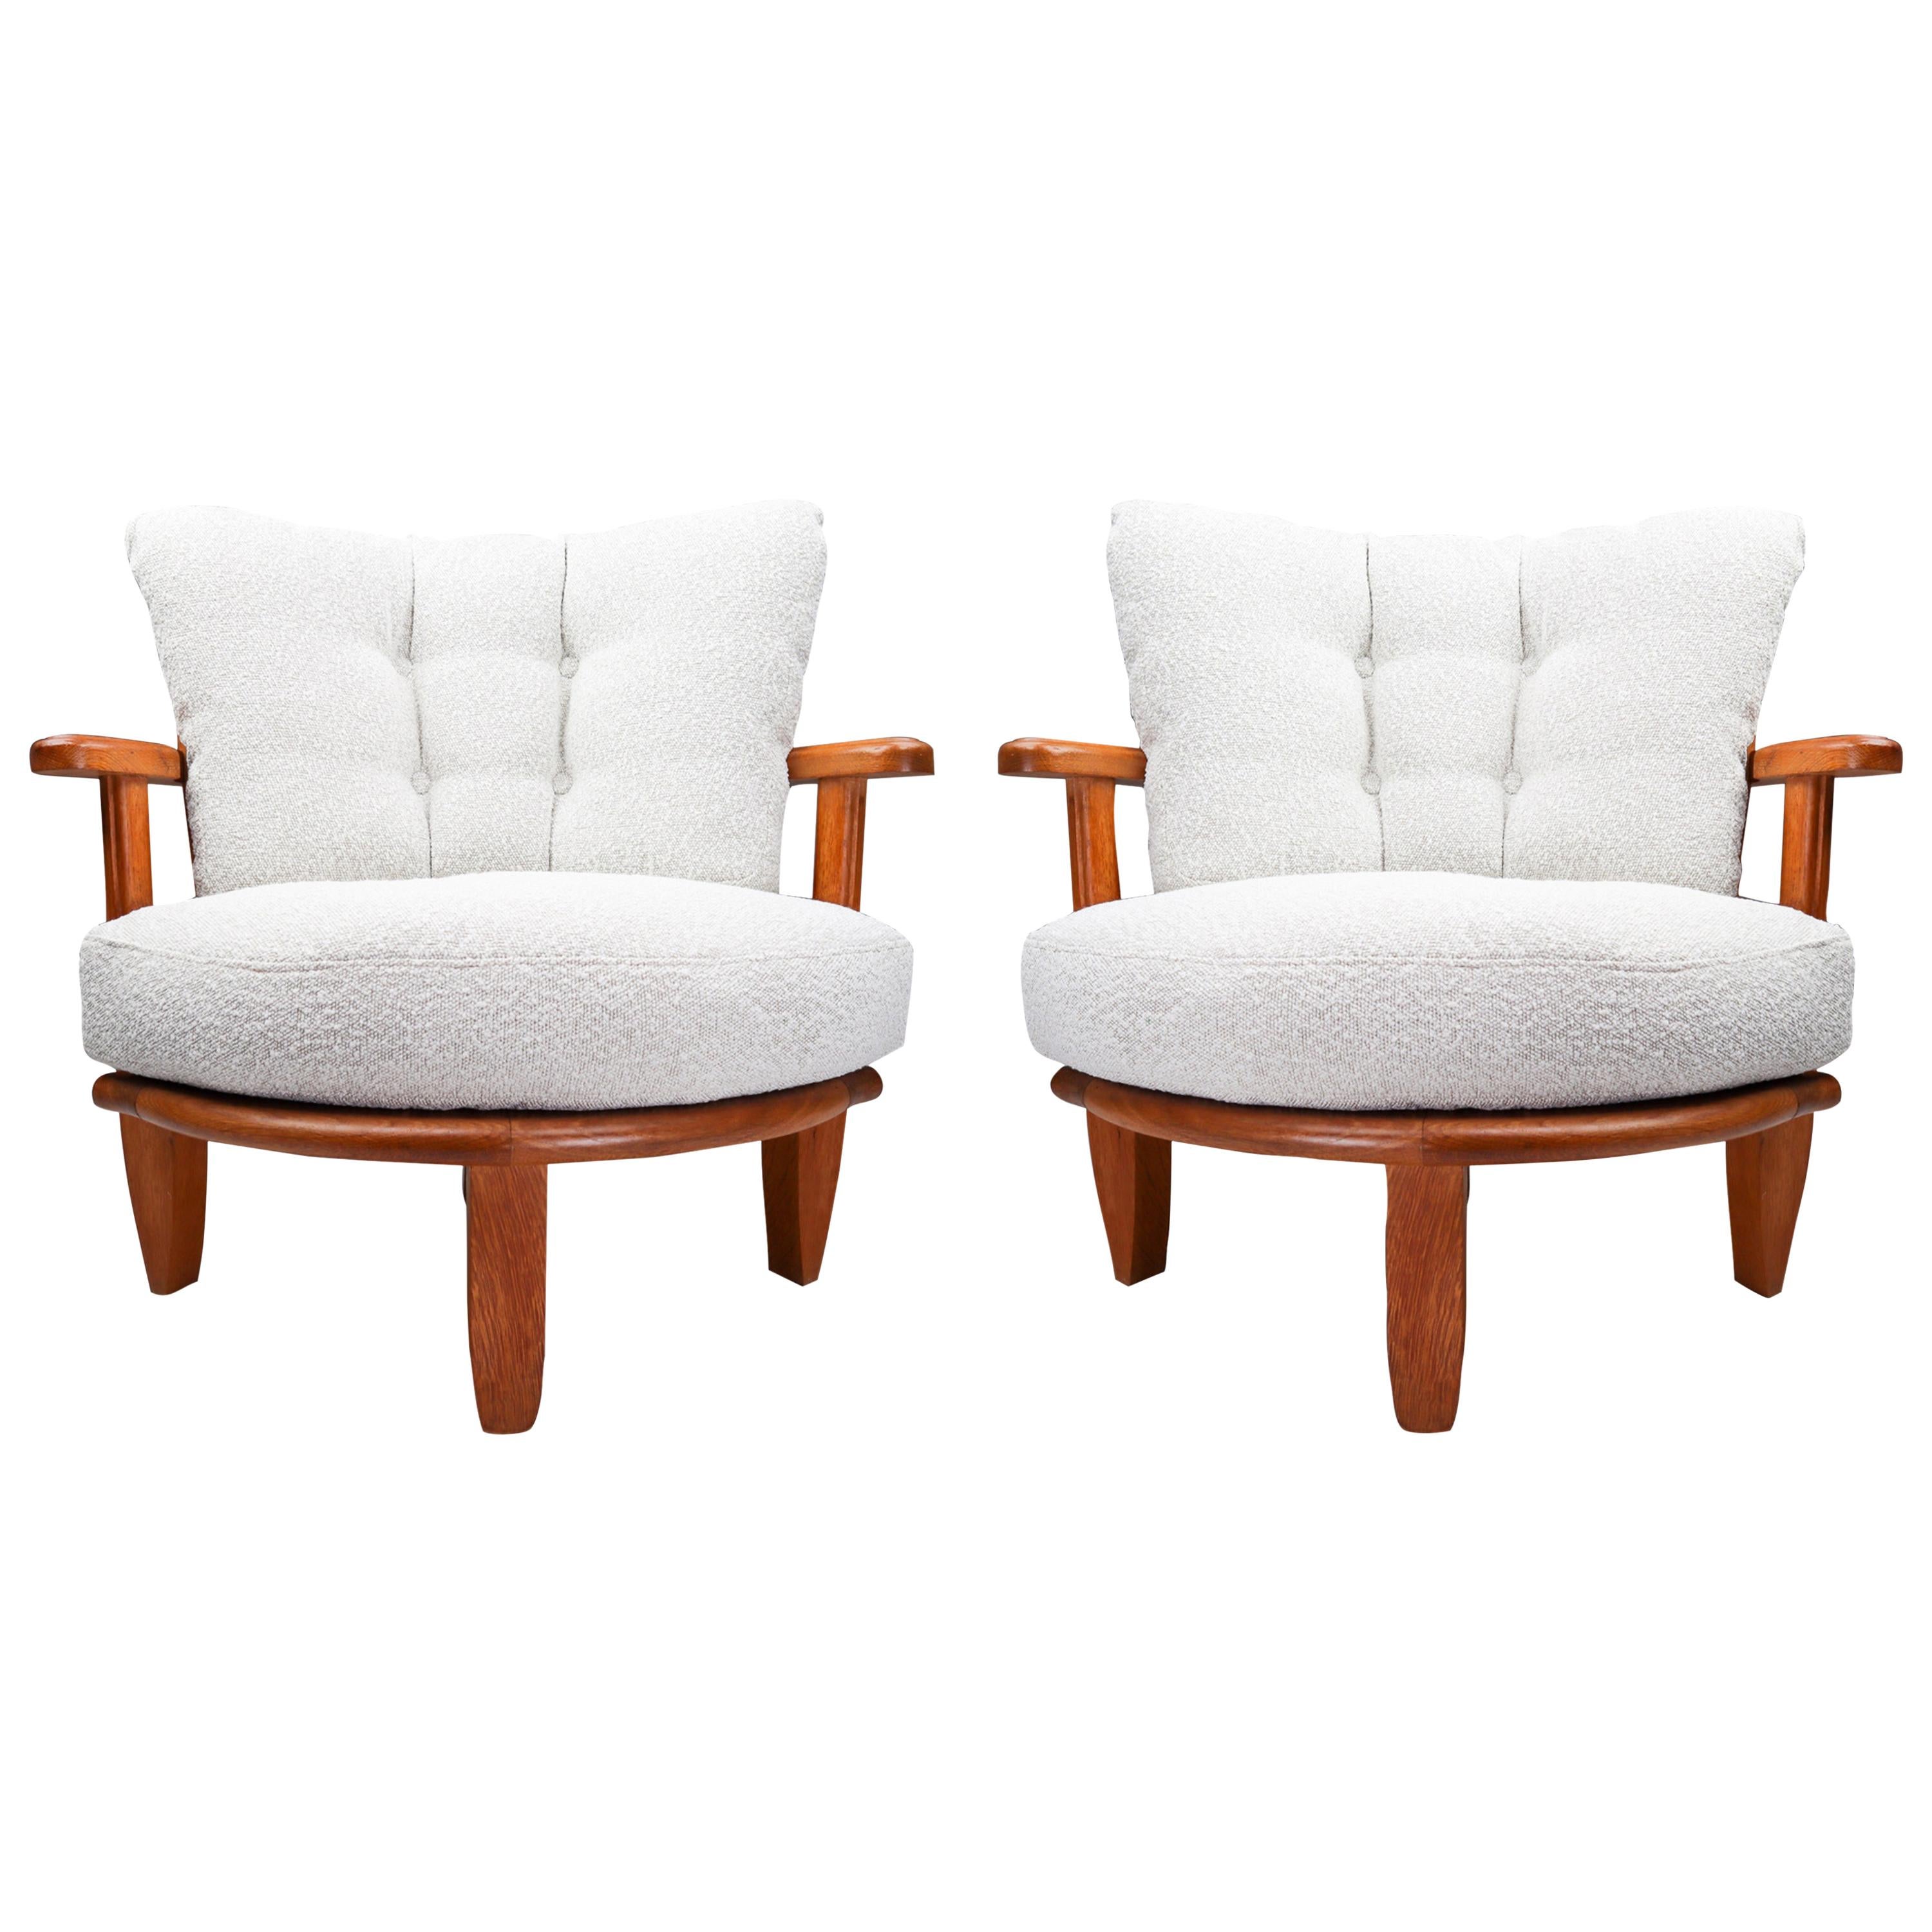 Guillerme et Chambron 'Tricoteuse' Chairs in Oak and Bouclé Fabric, France, 1950